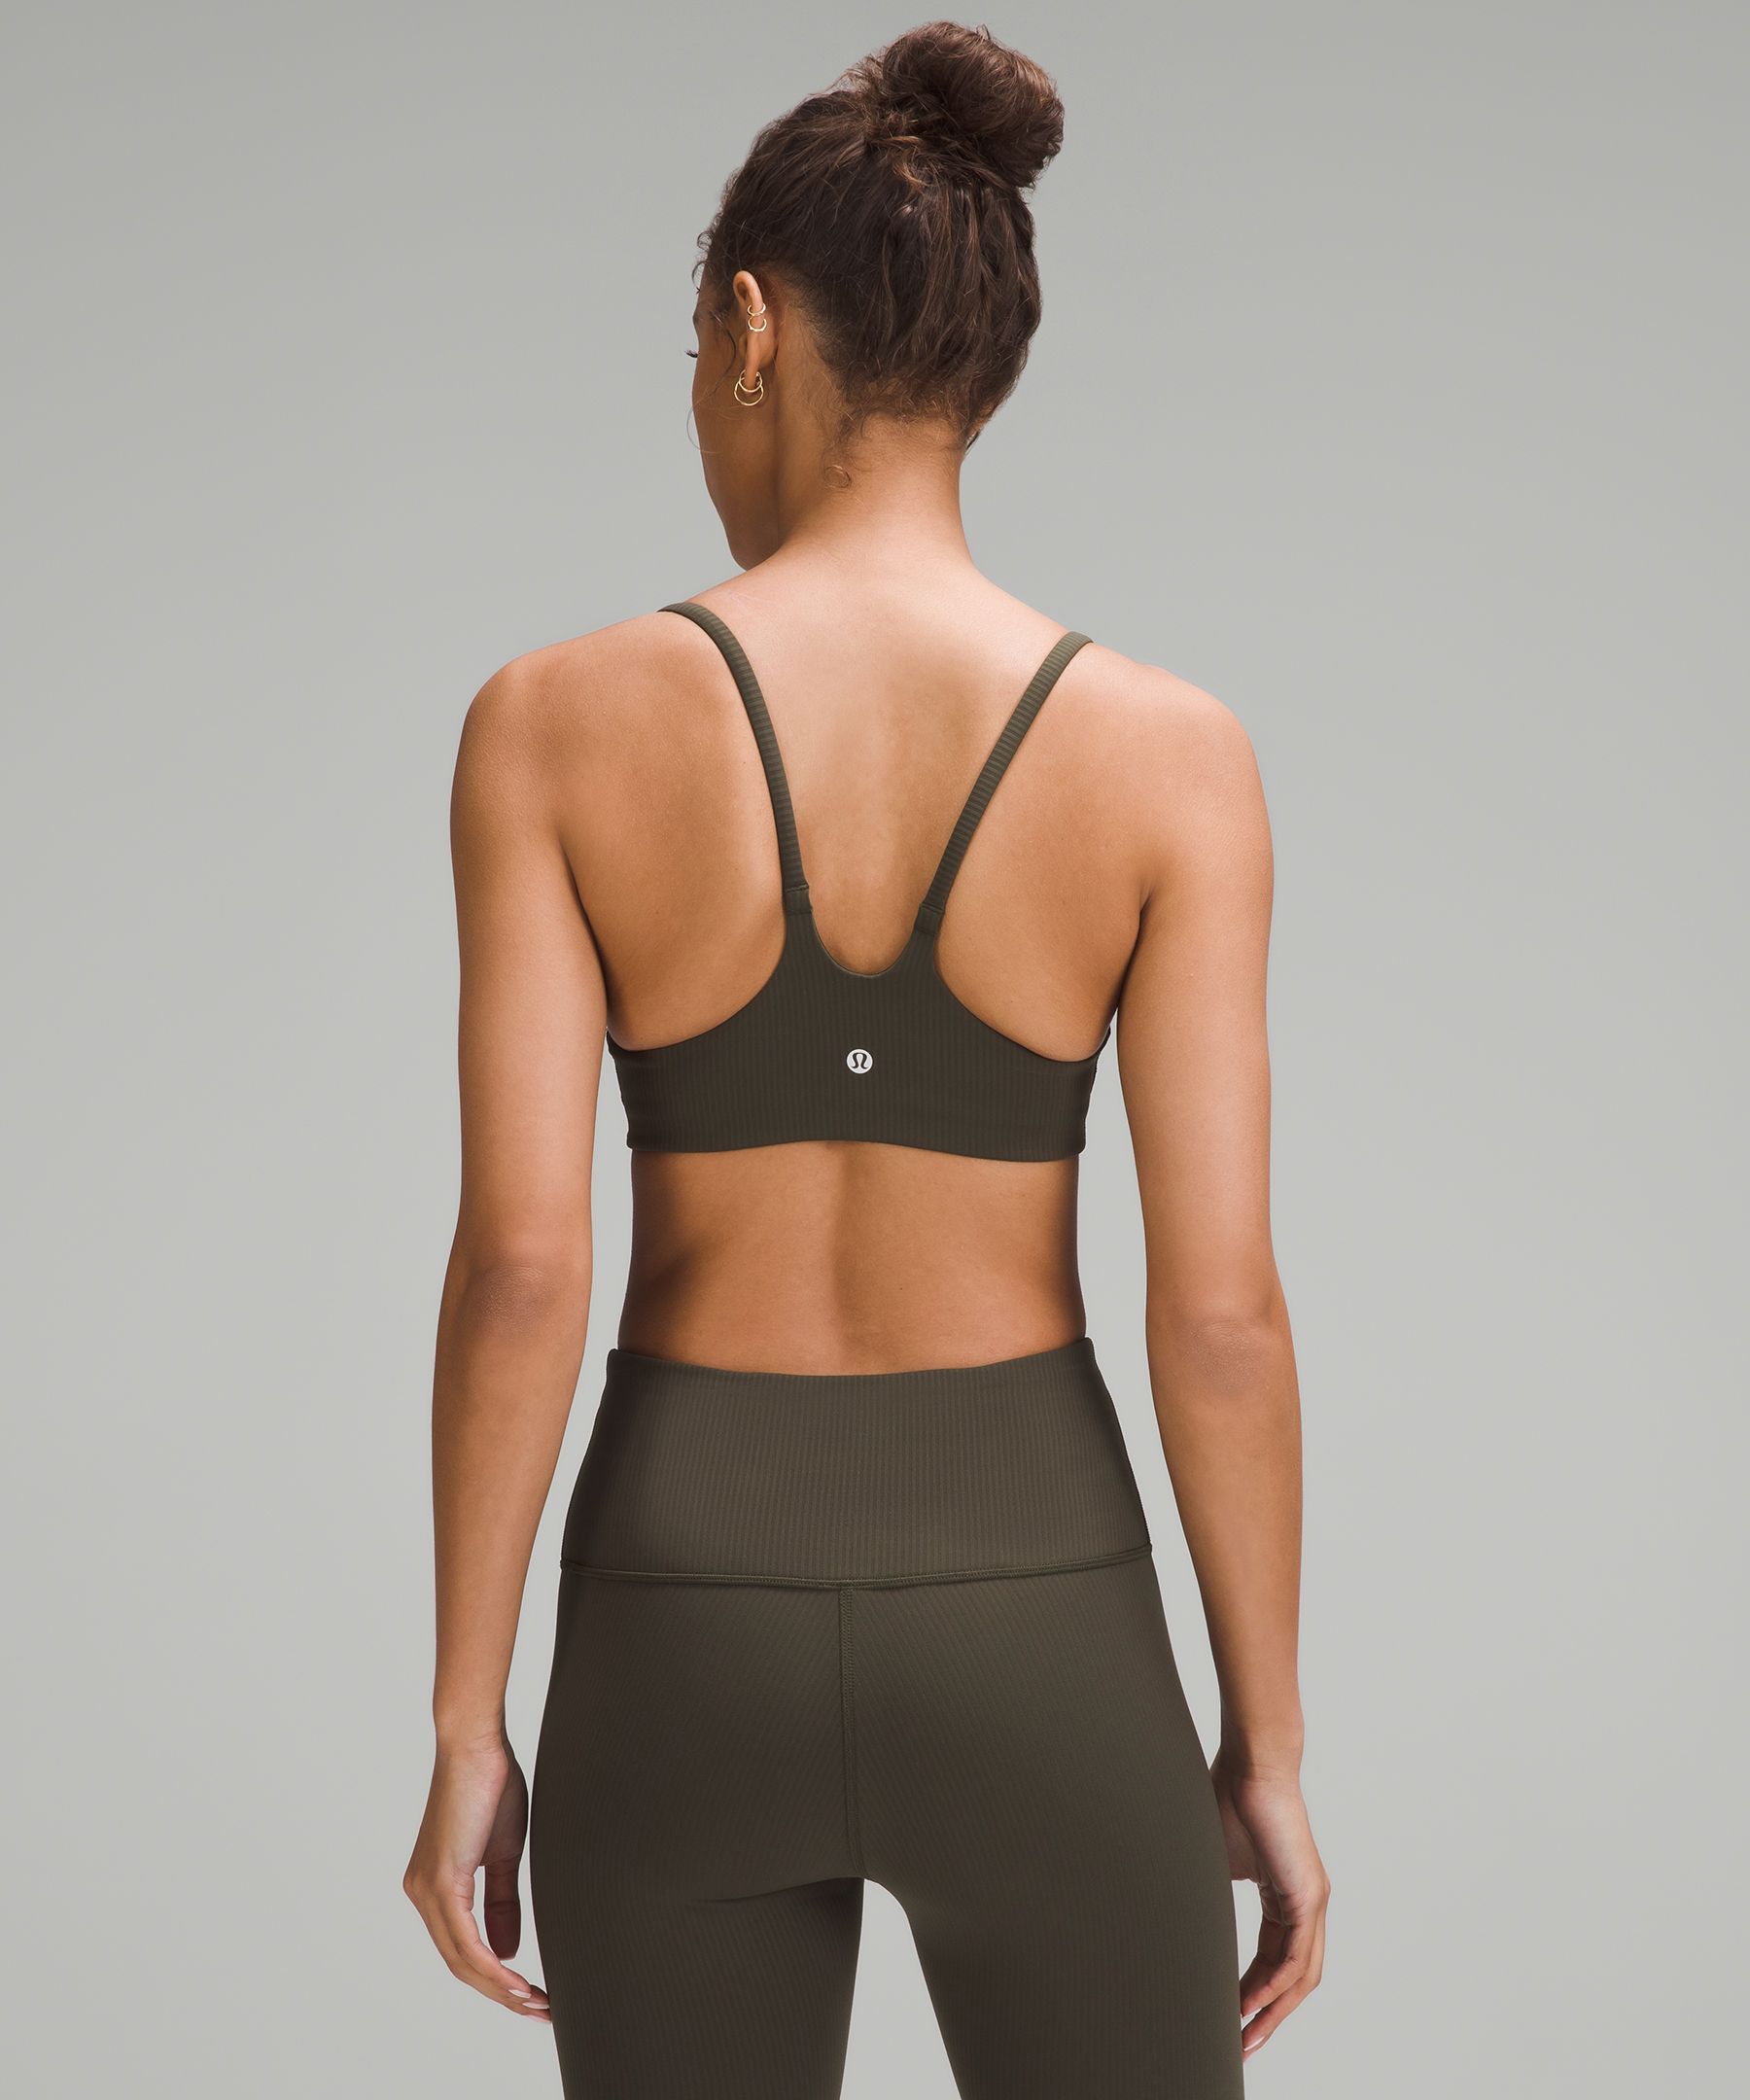 Lululemon Energy Bra Long Line and Wunder Train High Rise Short, 13  Matching Sets You Can Shop at Lululemon, Because Your Shades of Black  Should Match